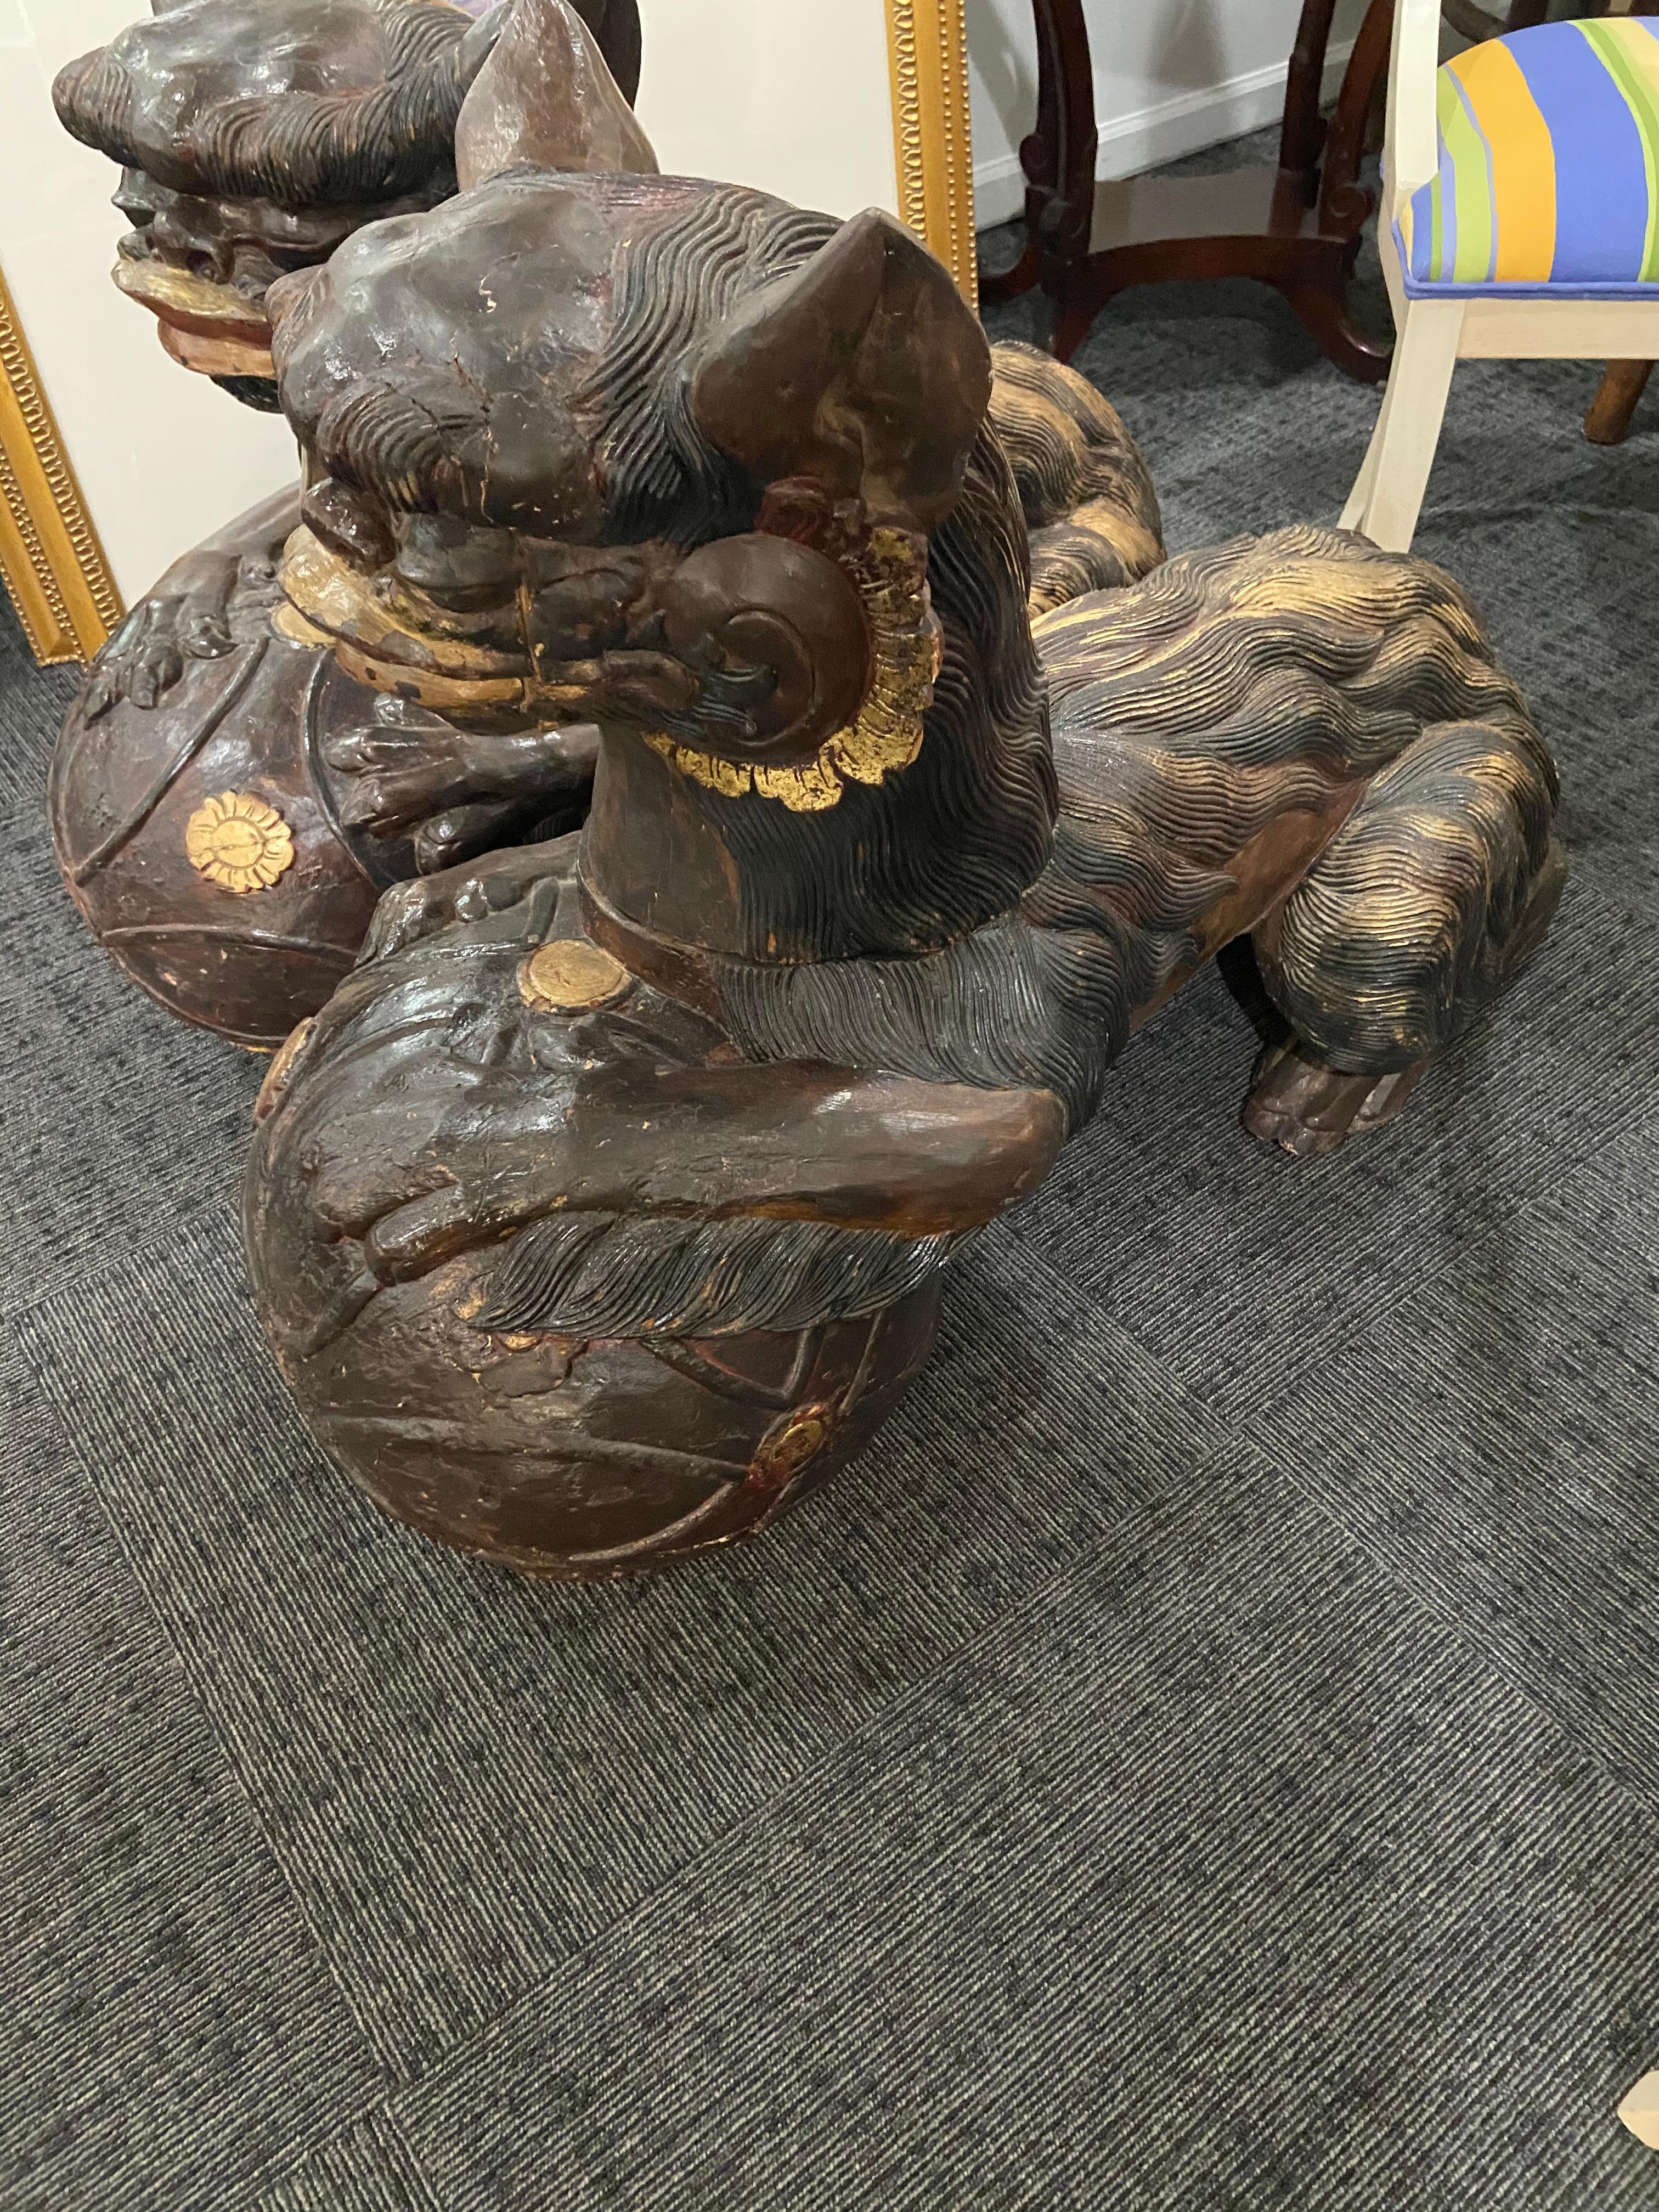 Large pair of foo dogs in the Chinese Style. Early 20th century or earlier. Carved from solid wood coming apart in 2 pieces. Heads are removable.  Approximate size 40” length 16” wide and 30” tall.